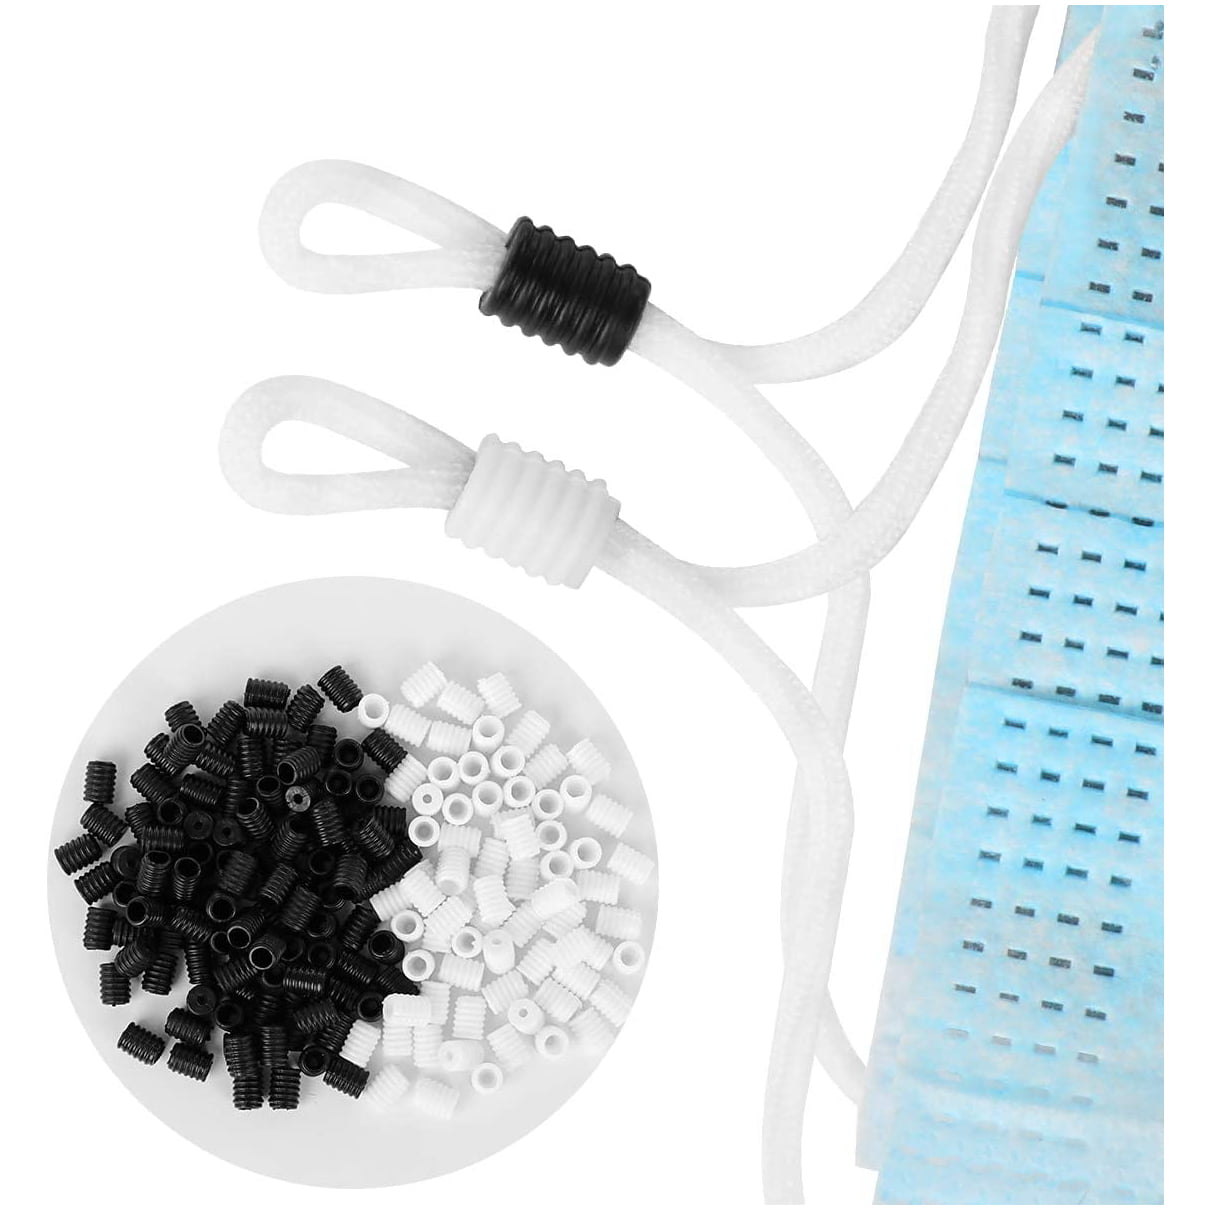 Toggles for Drawstrings Elastic Cord Rope Adjuster Non-Slip Stopper Silicone Cord Stops Threader Included LDream Cord Locks for Face Mask Black and White 200pcs